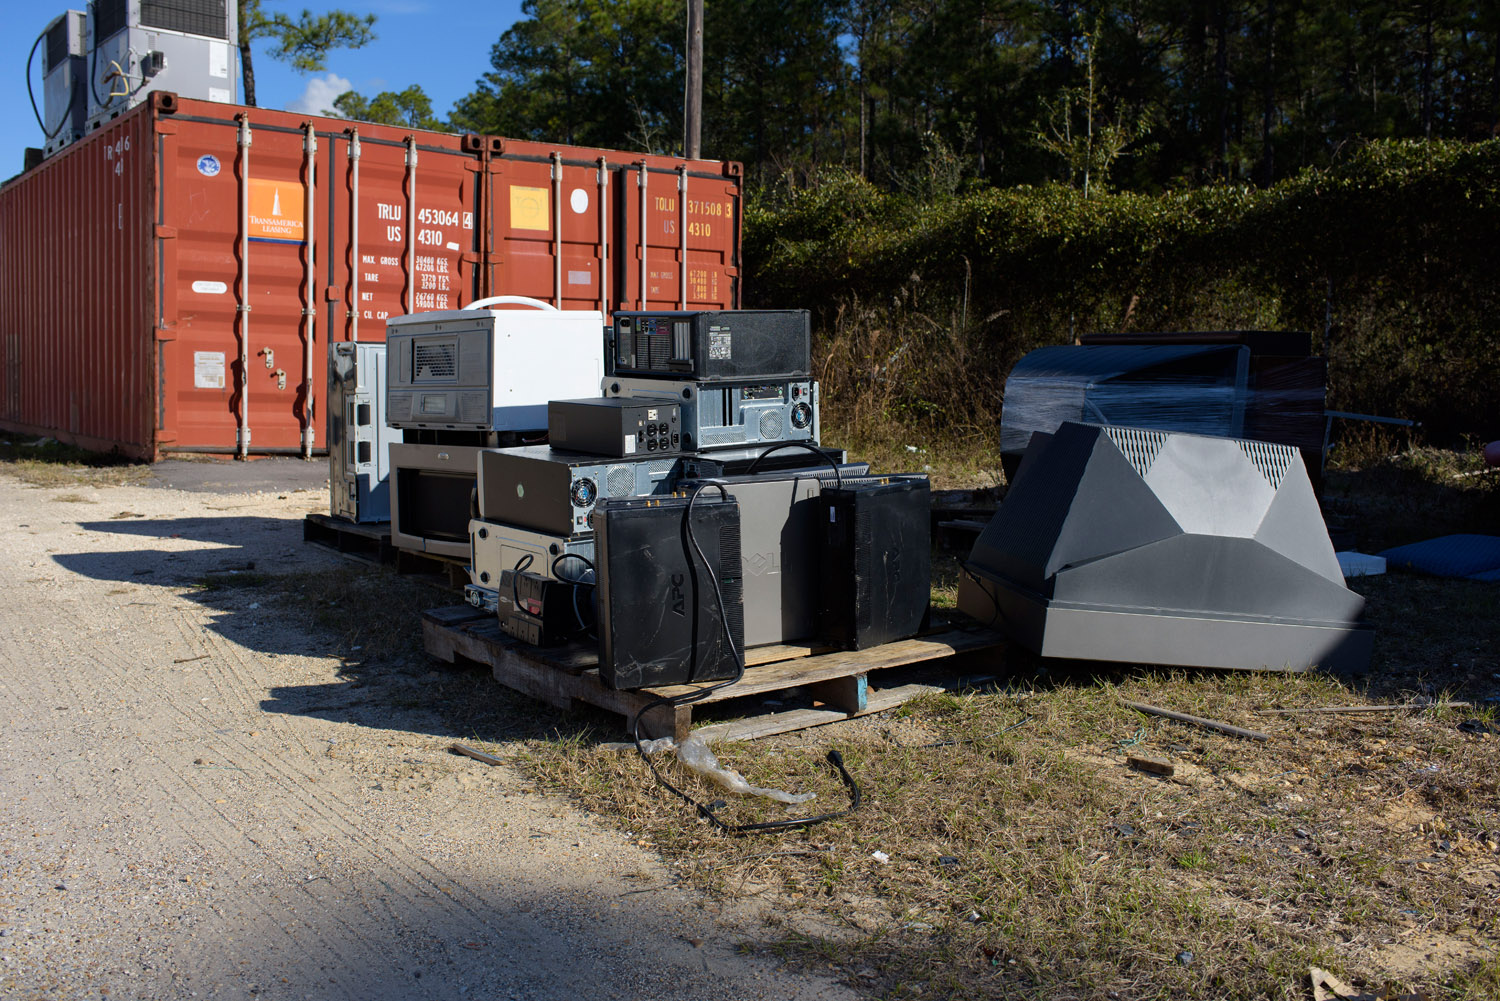 In front of a railroad car on the sand, an overturned tube television, right, shines beside a pallet loaded with old VCRs, CPUs, and microwaves.